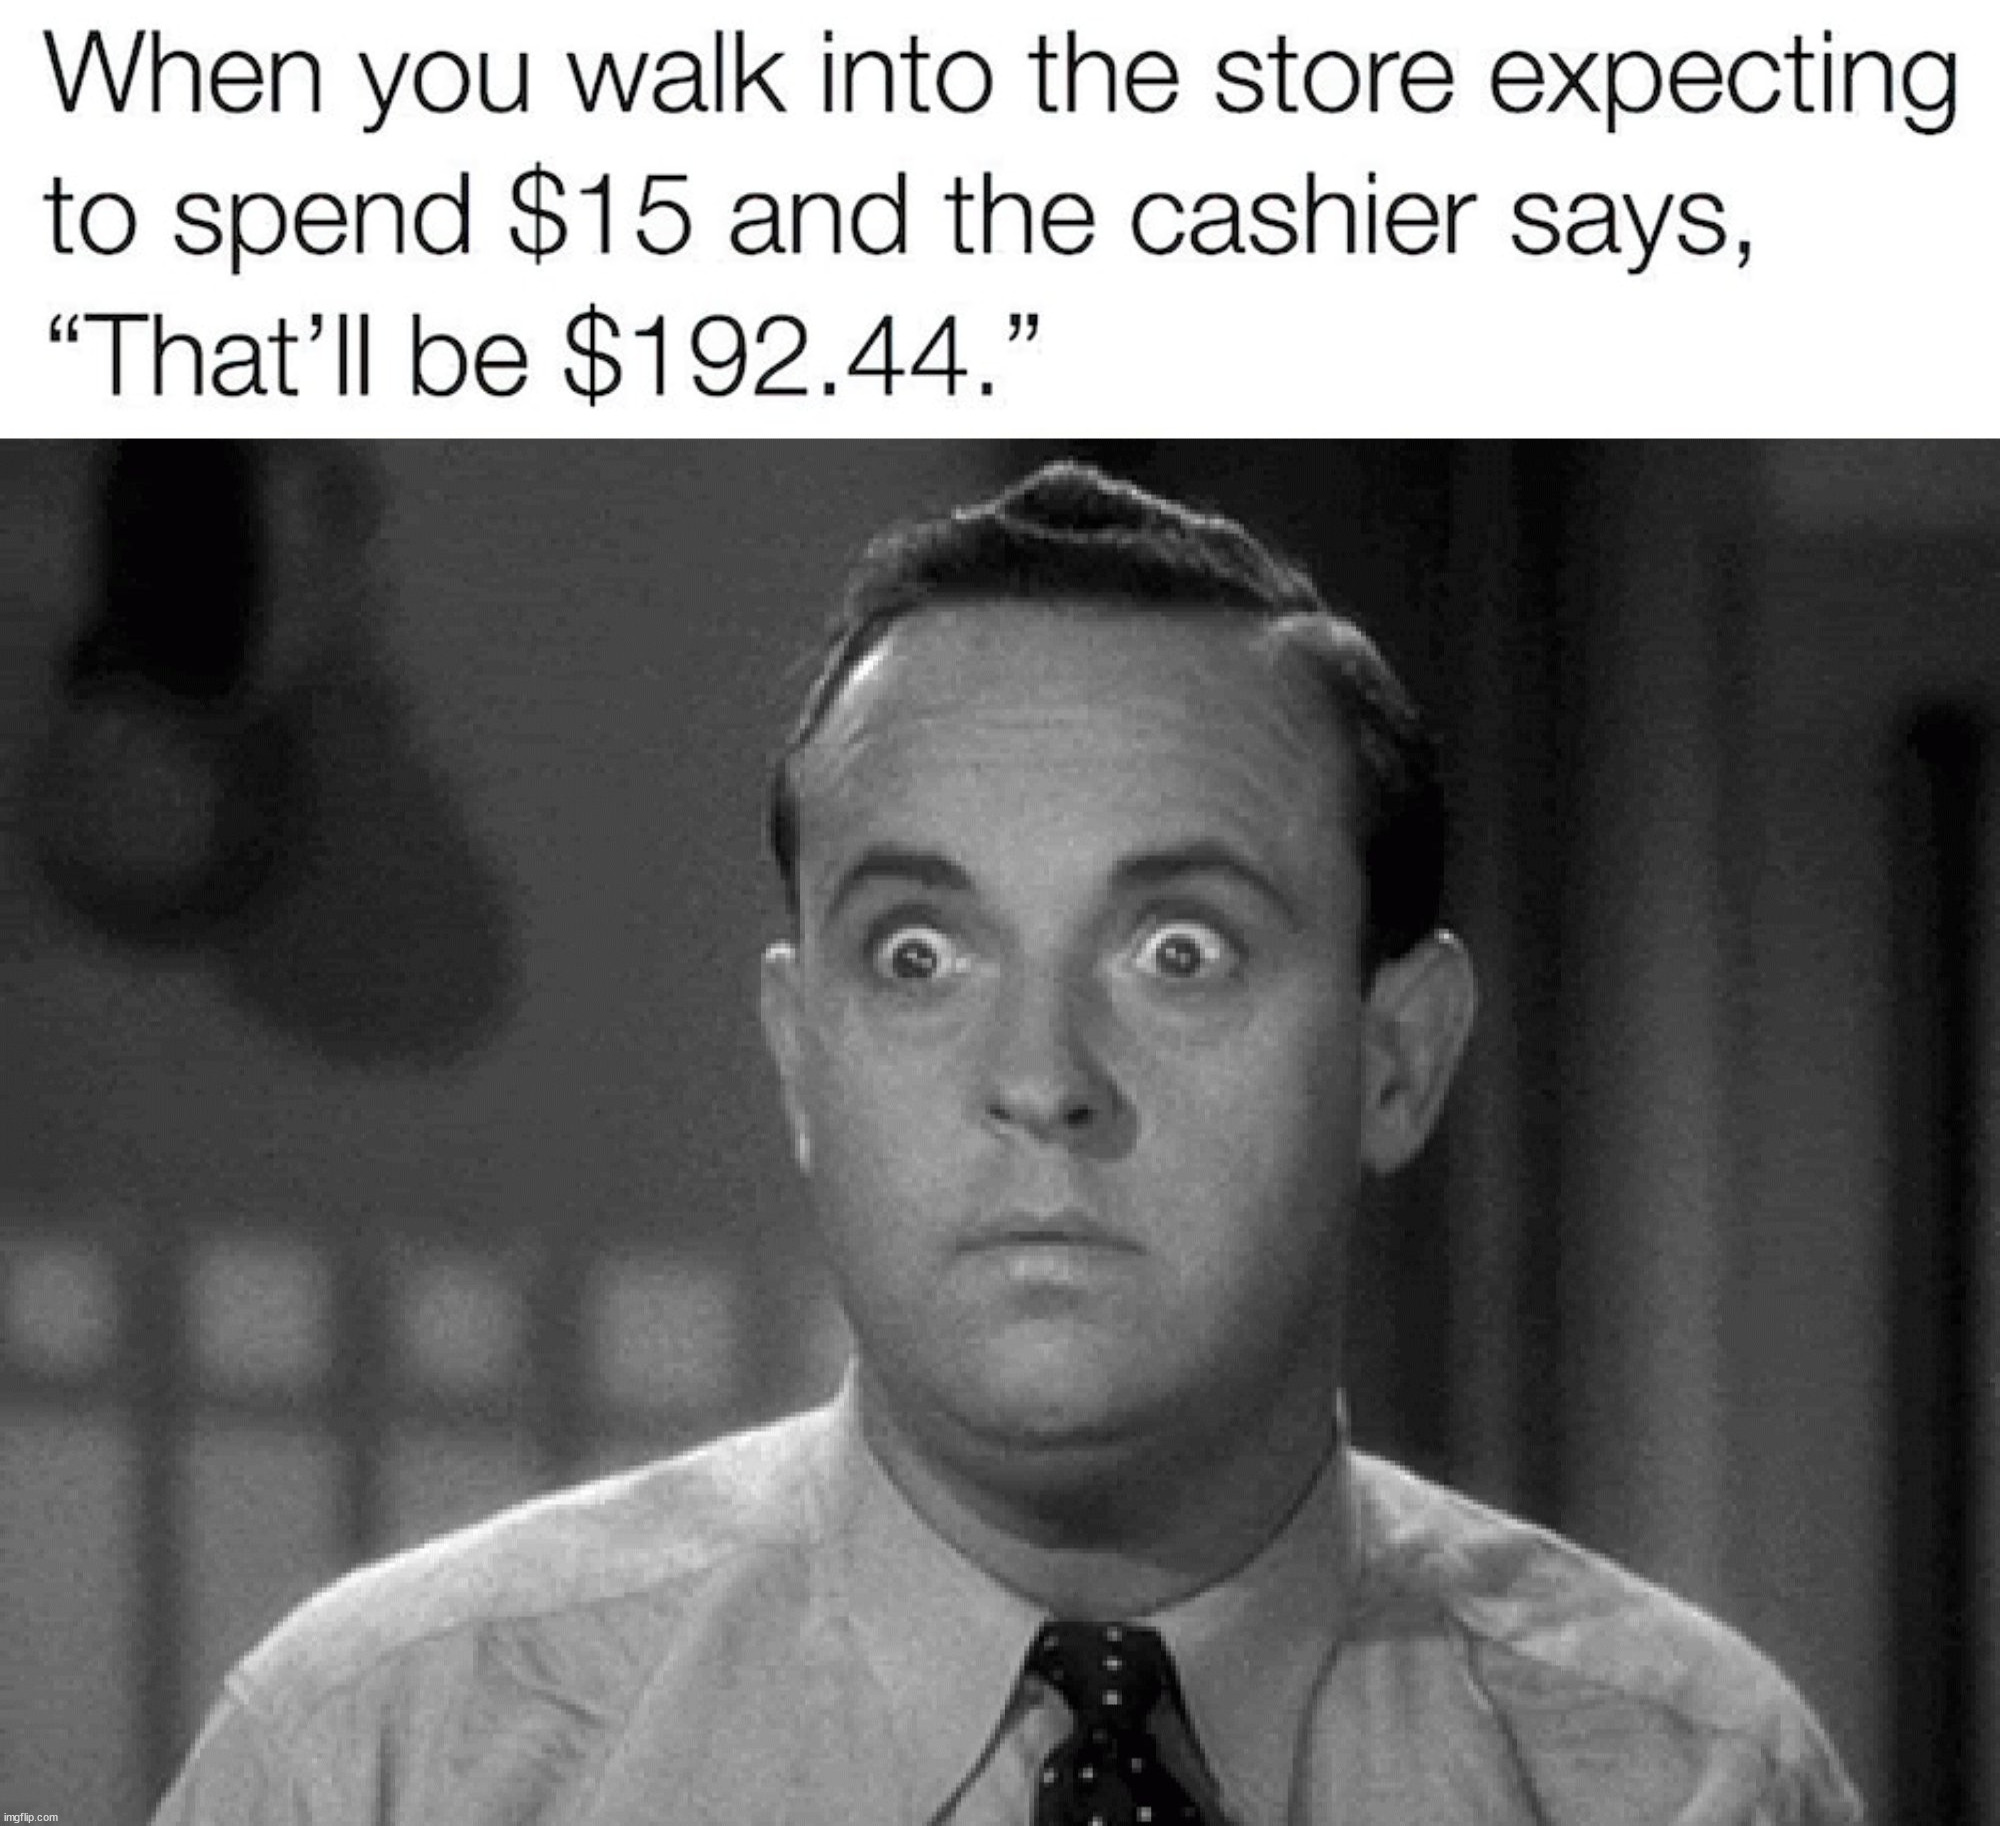 It is shocking everytime I go shopping | image tagged in shocked face,politics | made w/ Imgflip meme maker